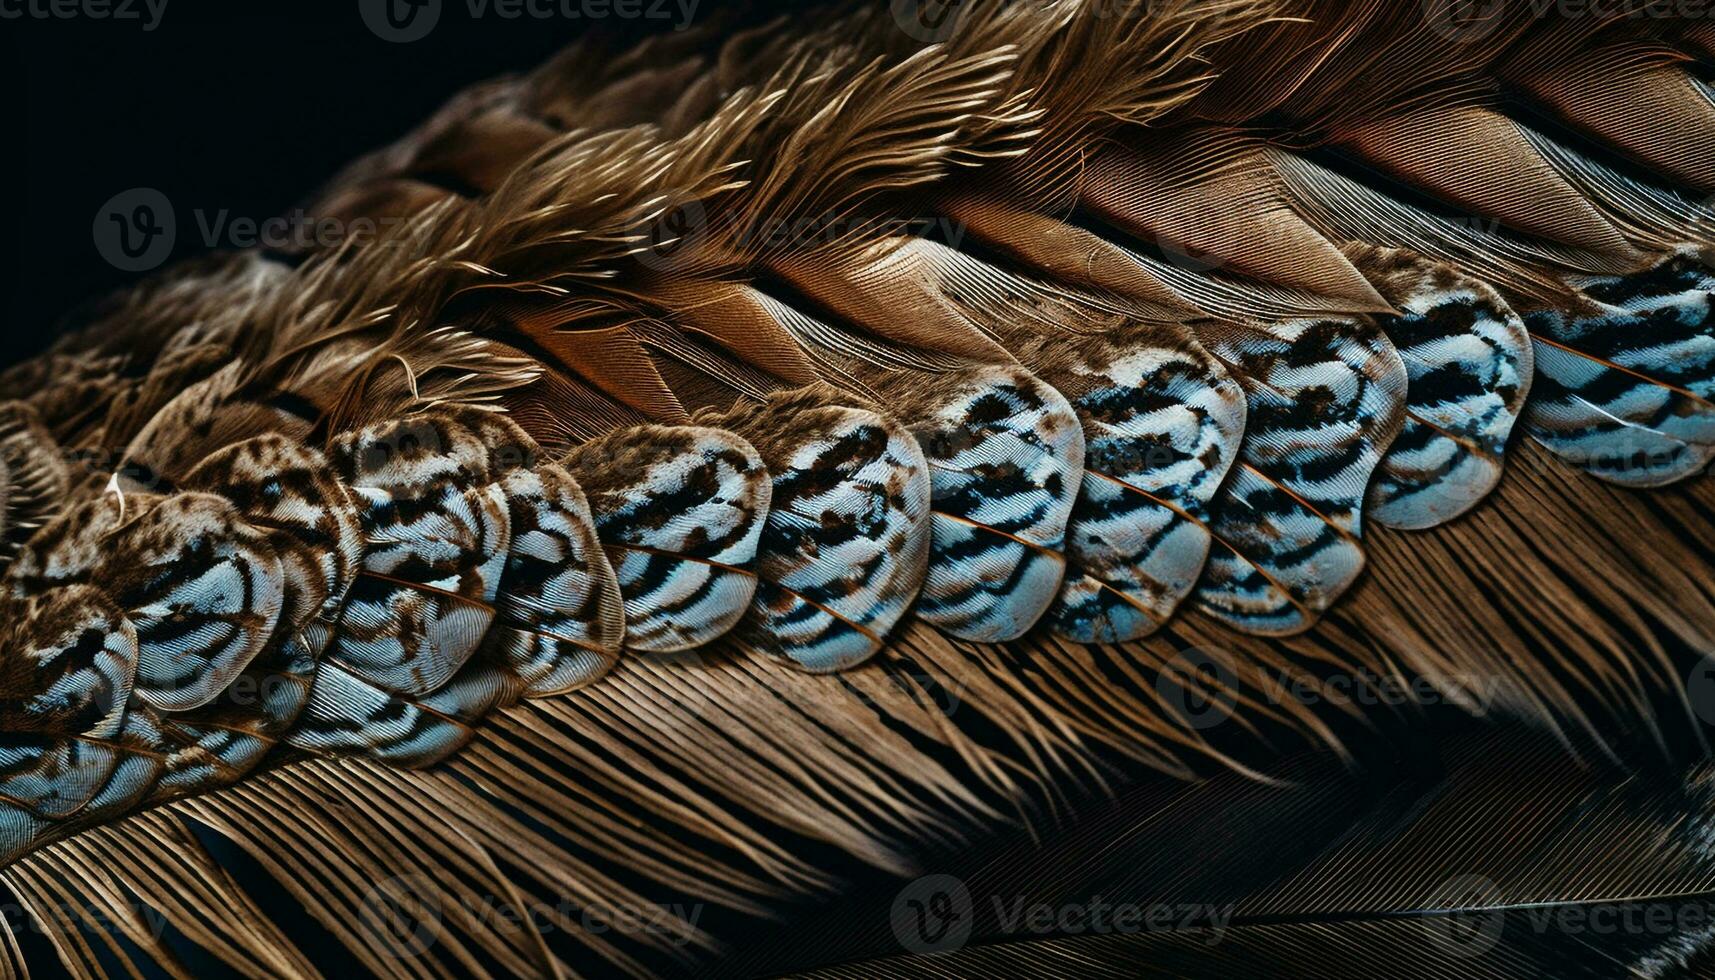 Vibrant feathers adorn the elegance of peacock generated by AI photo